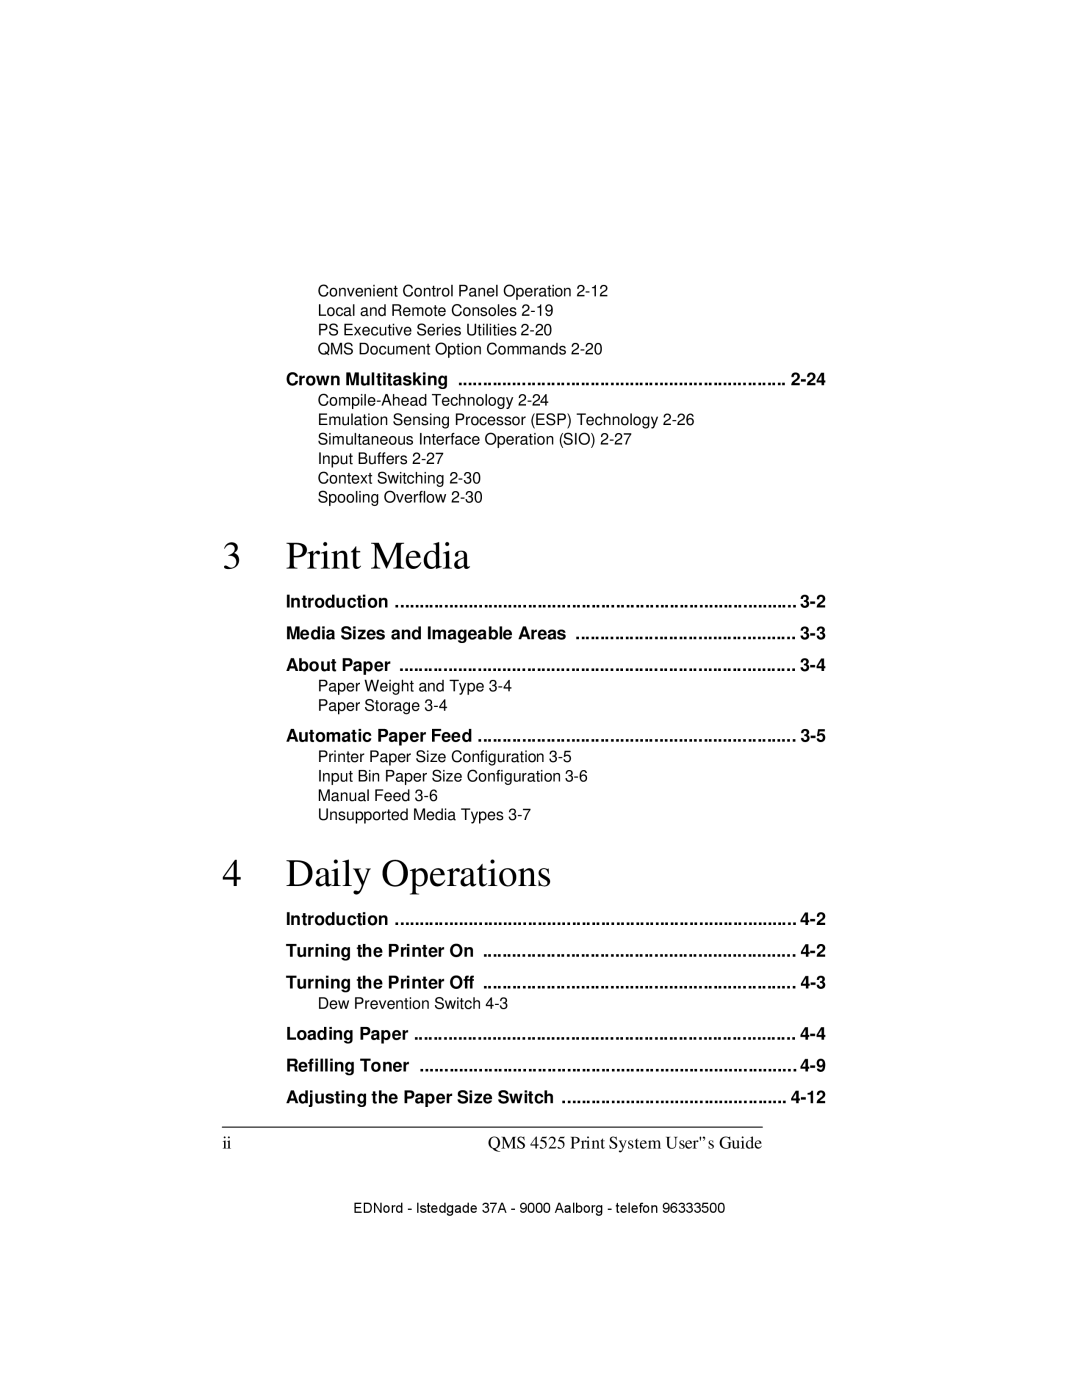 IBM manual Print Media, Daily Operations, QMS 4525 Print System User’s Guide 